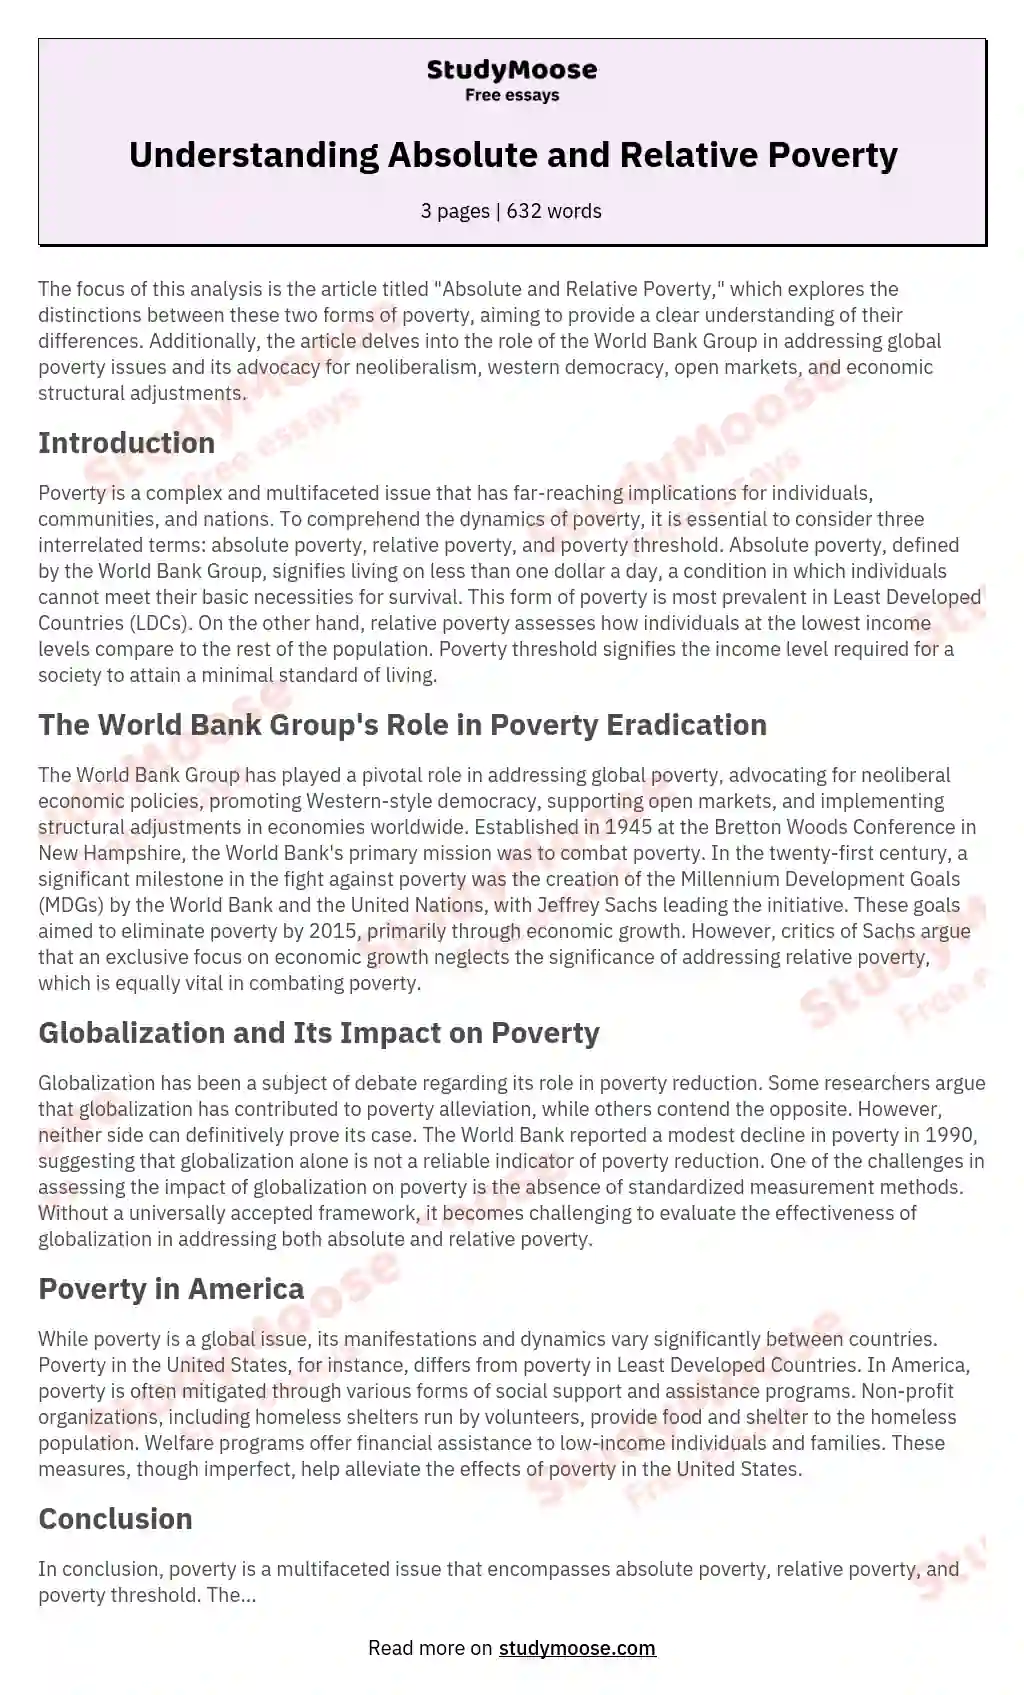 Understanding Absolute and Relative Poverty essay